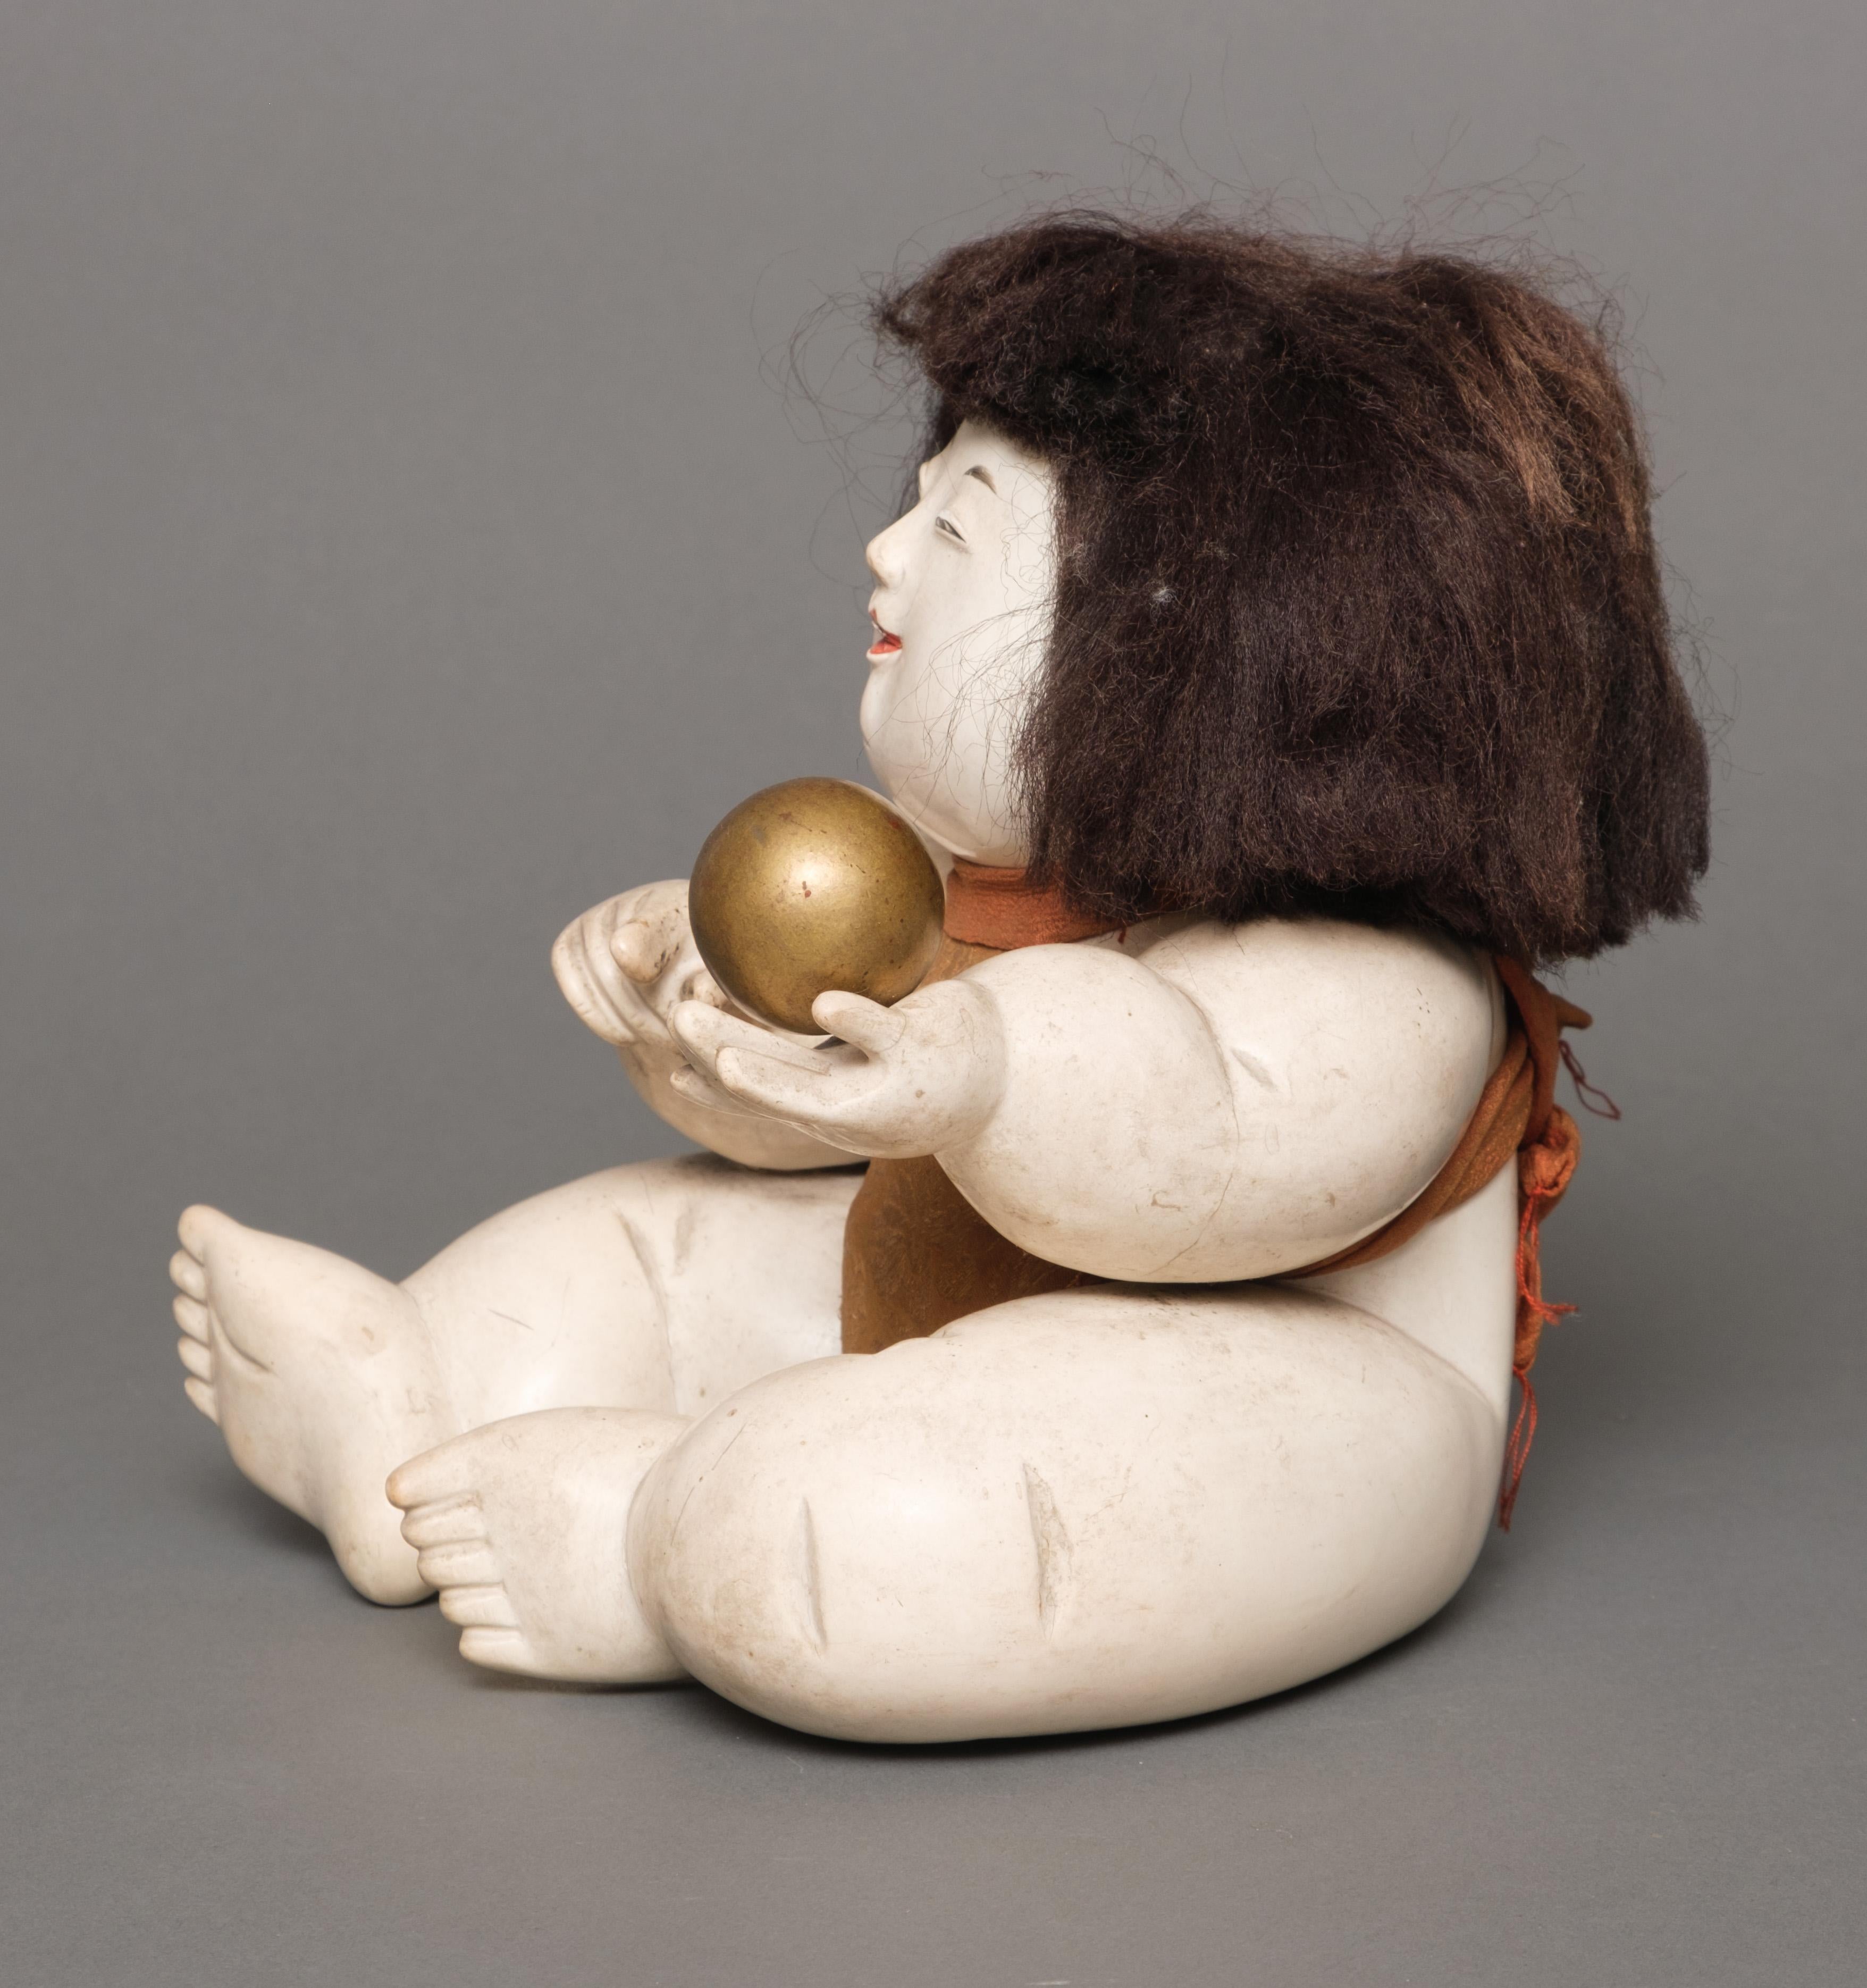 19th Century Japanese Edo-period gosho’ningyô 御所人形 (palace doll) of plump, seated child For Sale